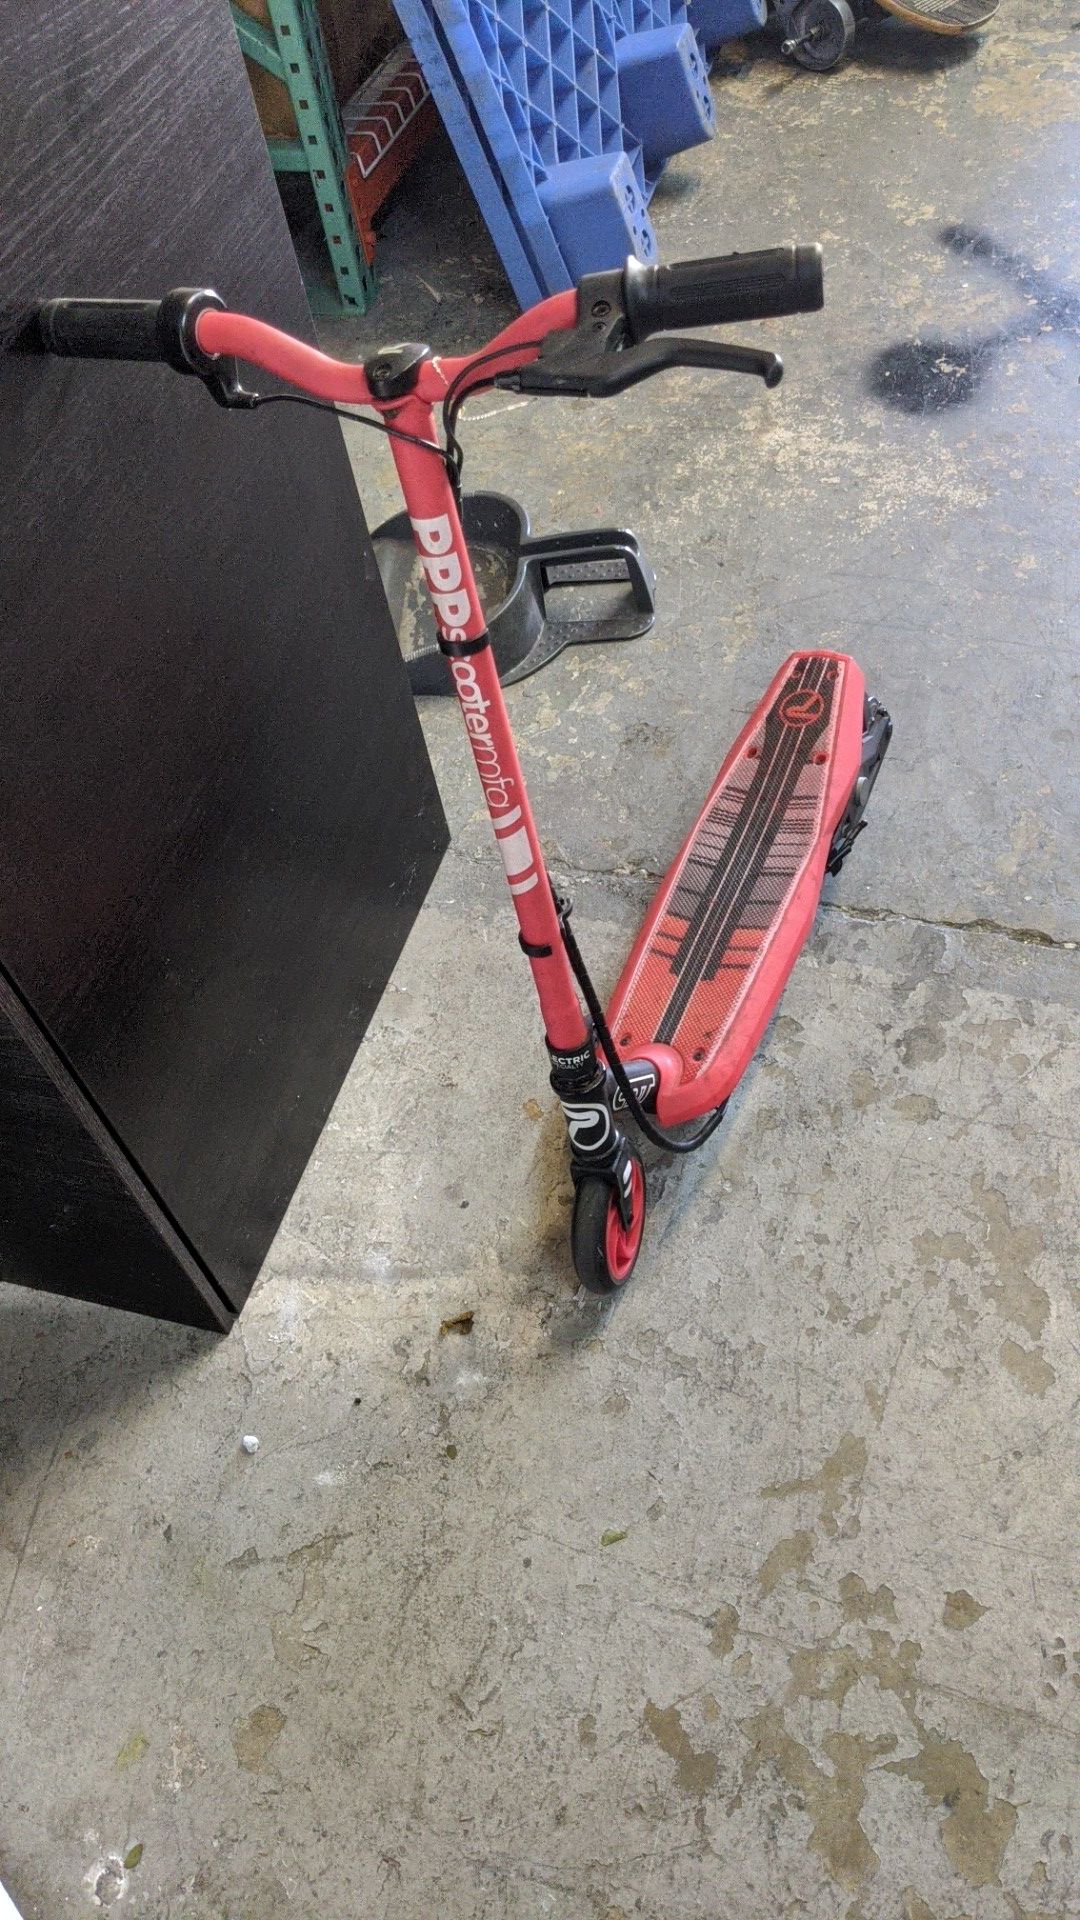 Lightning Scooter works but needs charger